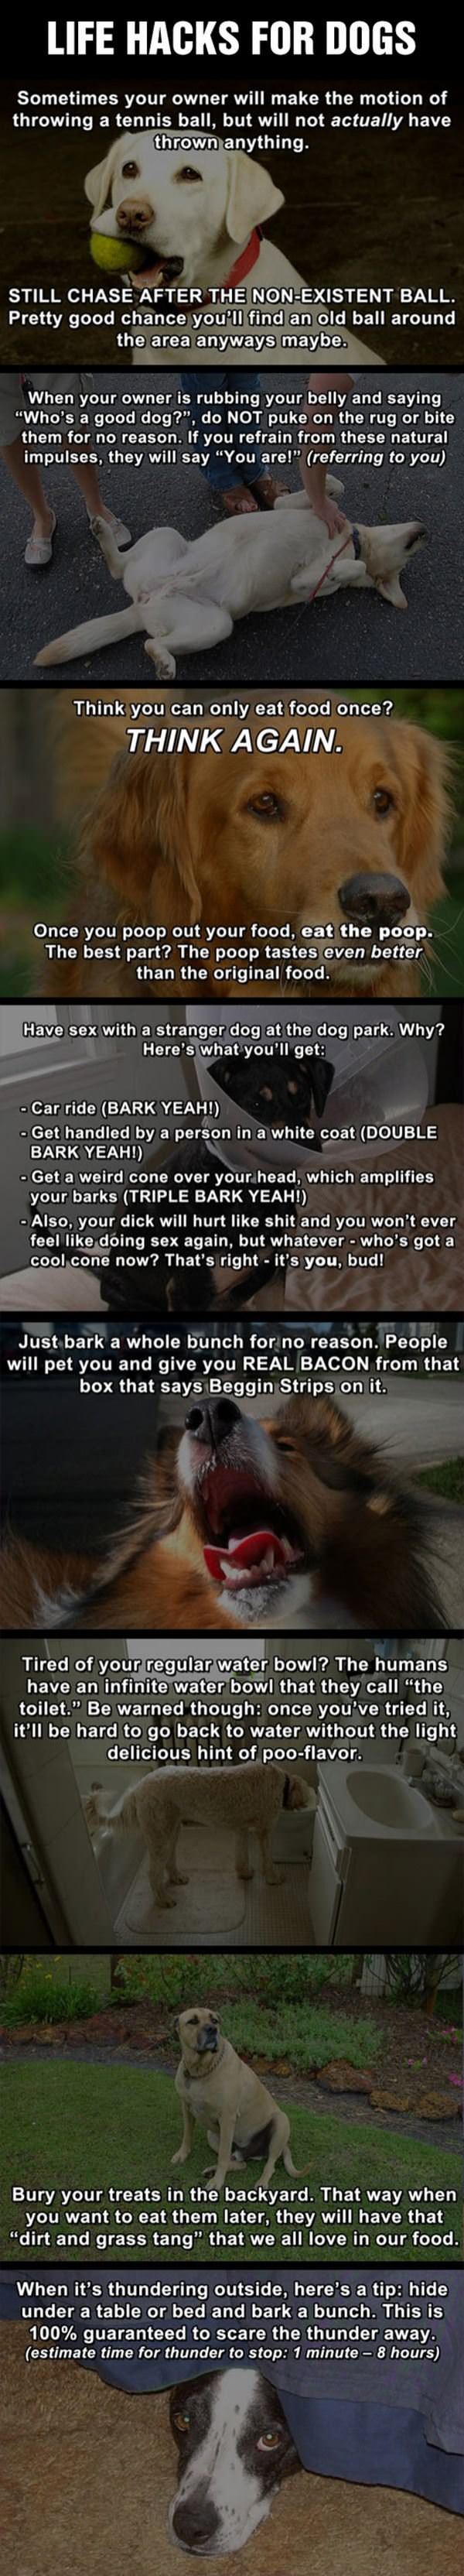 life hacks for dogs funny picture